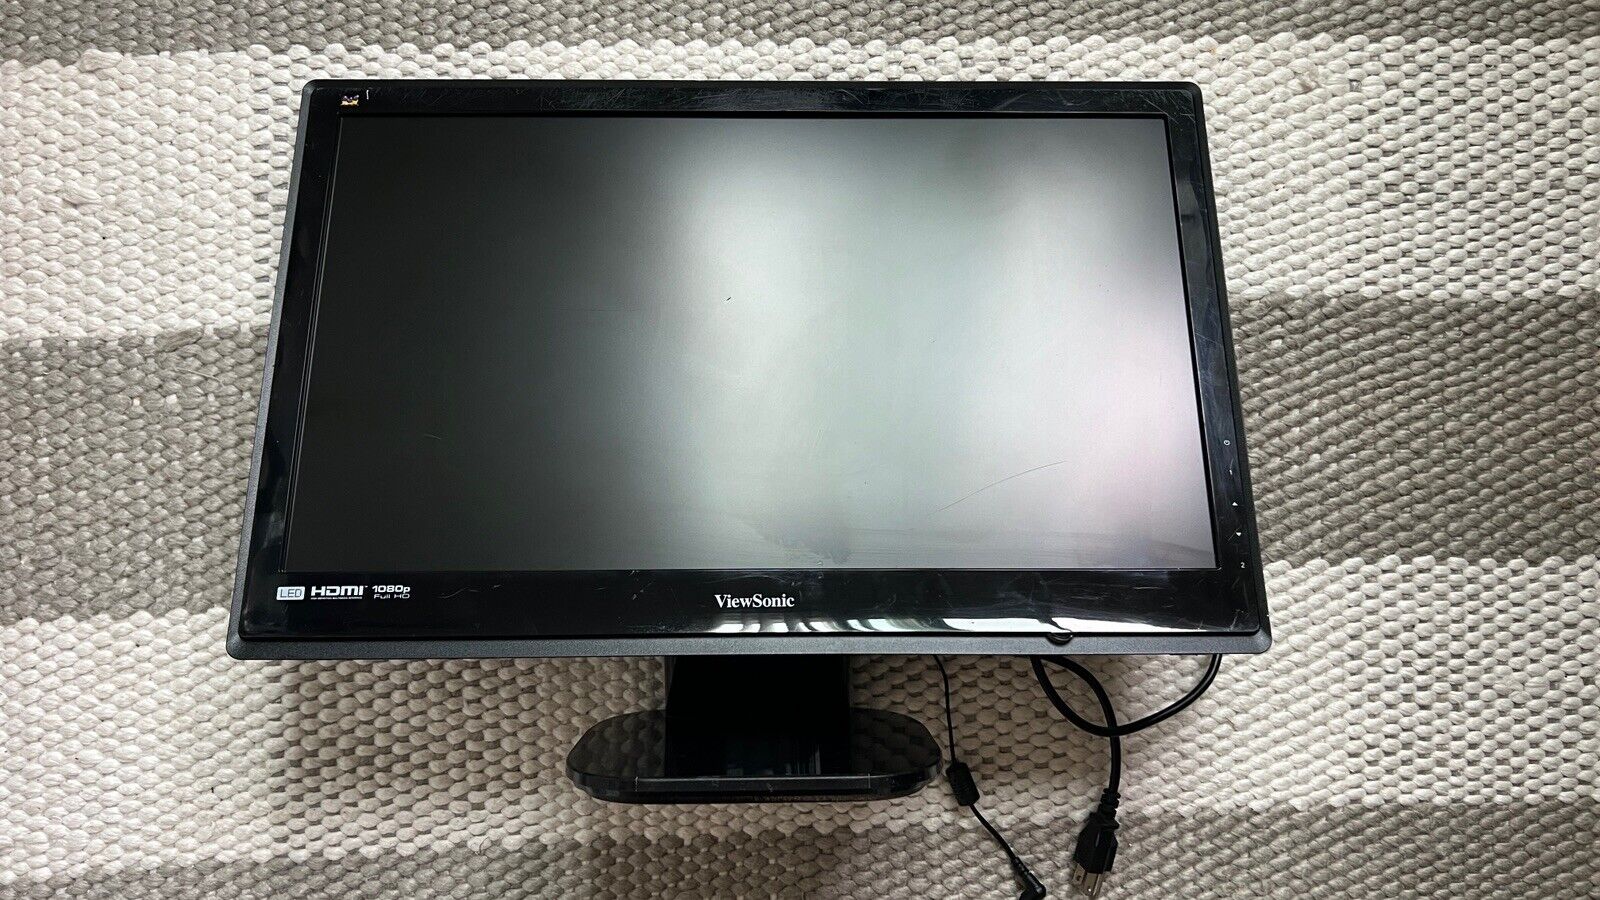 ViewSonic VX2453mh LED LCD Monitor Free Local Pickup Not Delivery